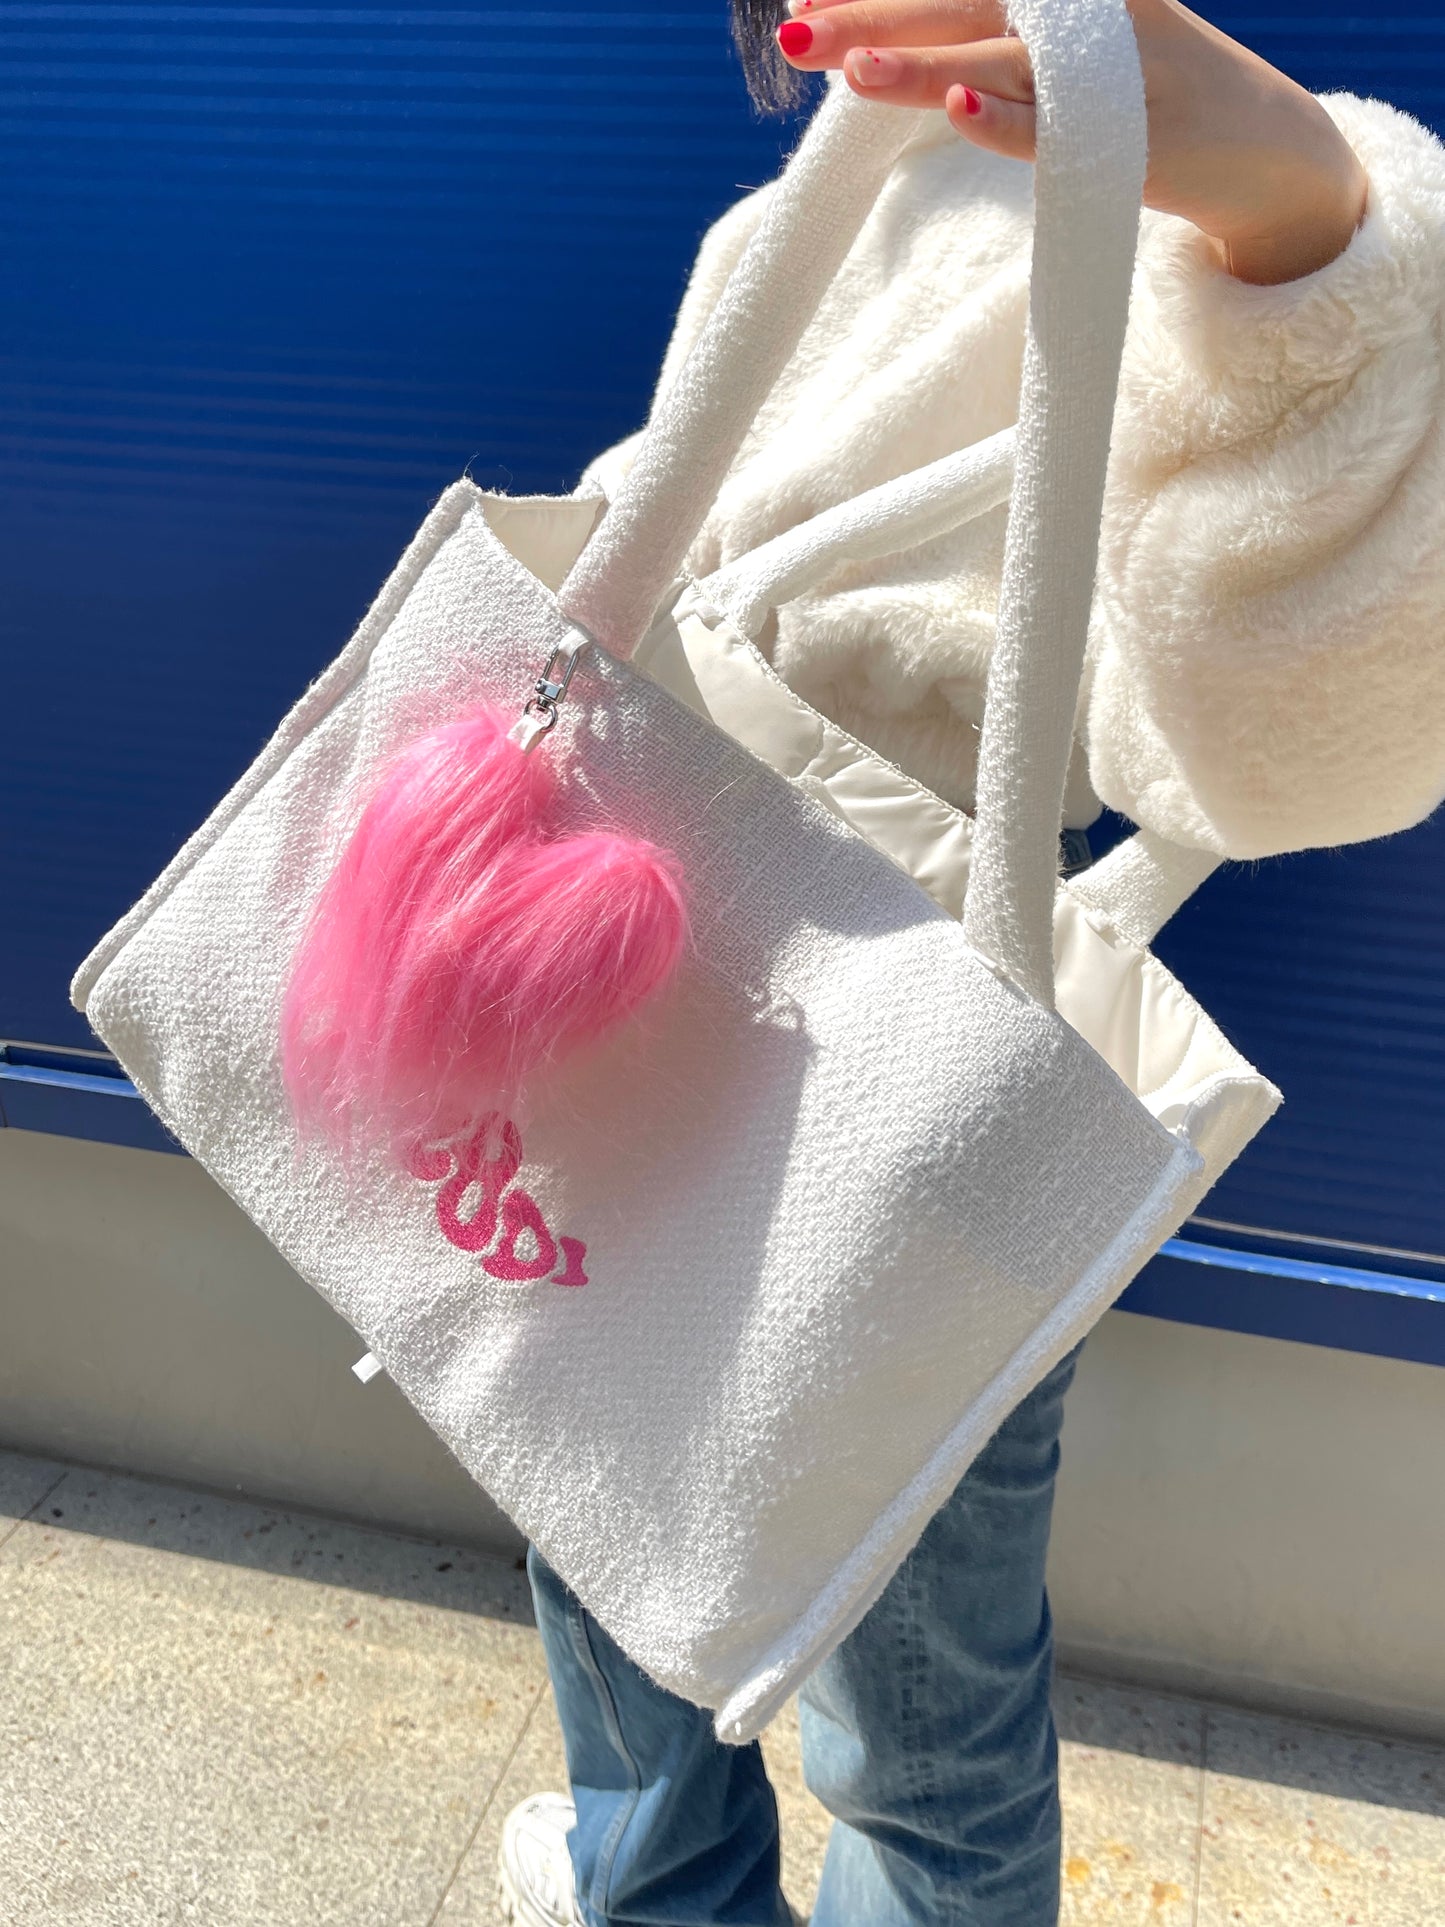 White Double-sided Bag + Pink Bag Charm